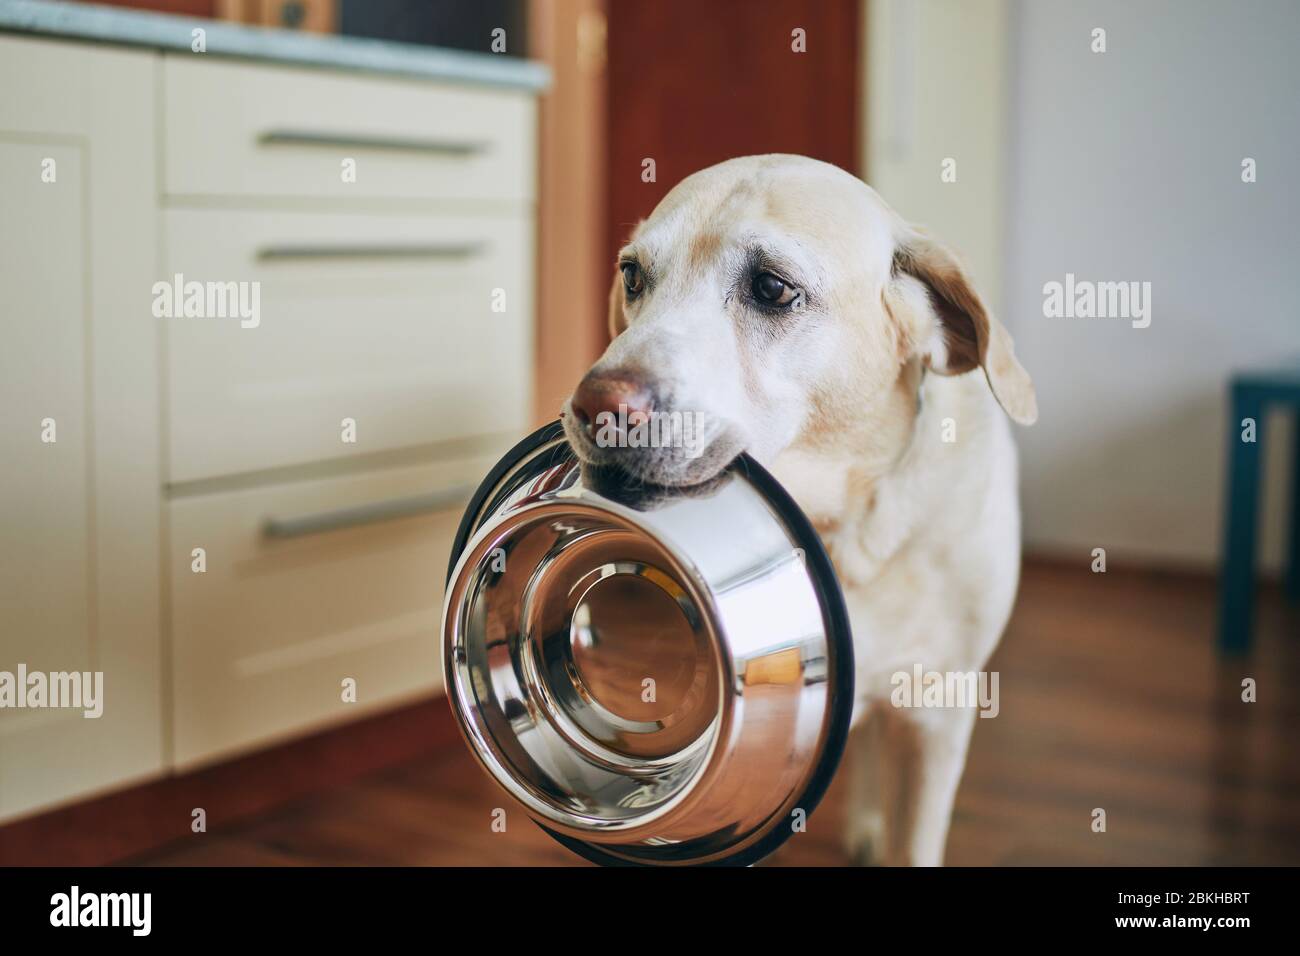 Hungry Puppy Dog Standing In His Food Bowl On A Kitchen Counter High-Res  Stock Photo - Getty Images